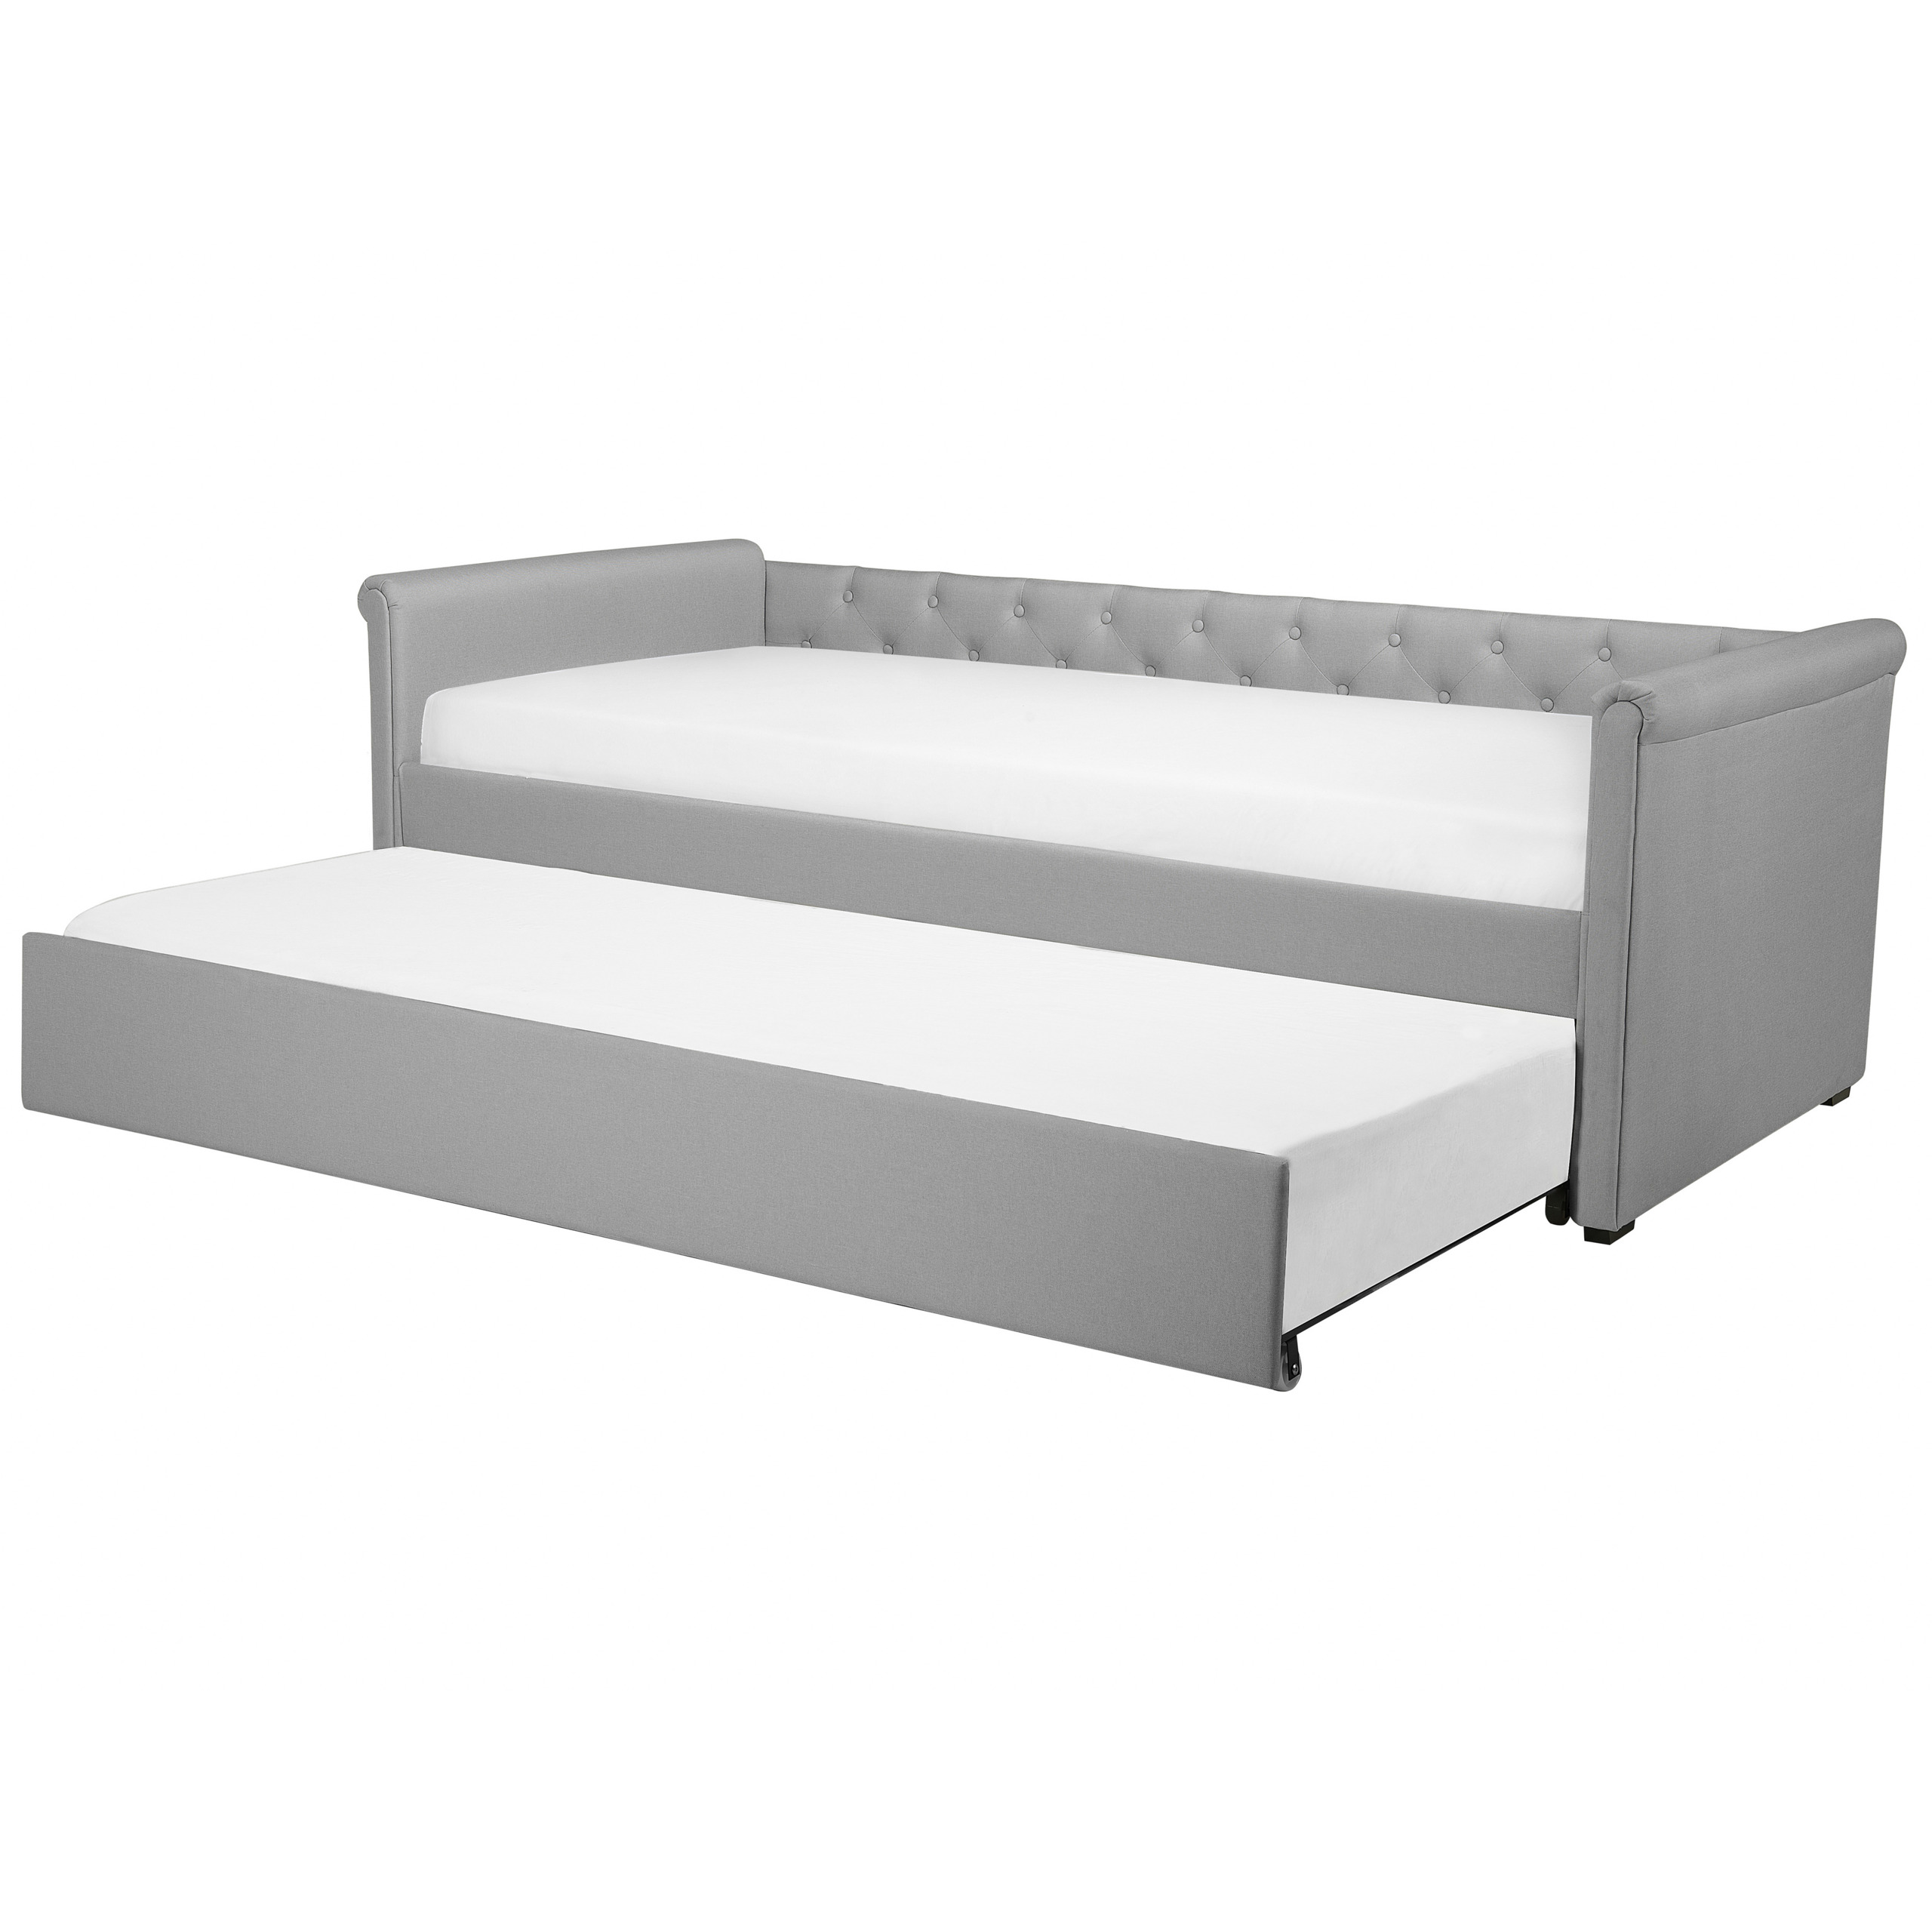 Beliani Trundle Bed Grey Fabric Upholstery EU Single Size Guest Underbed